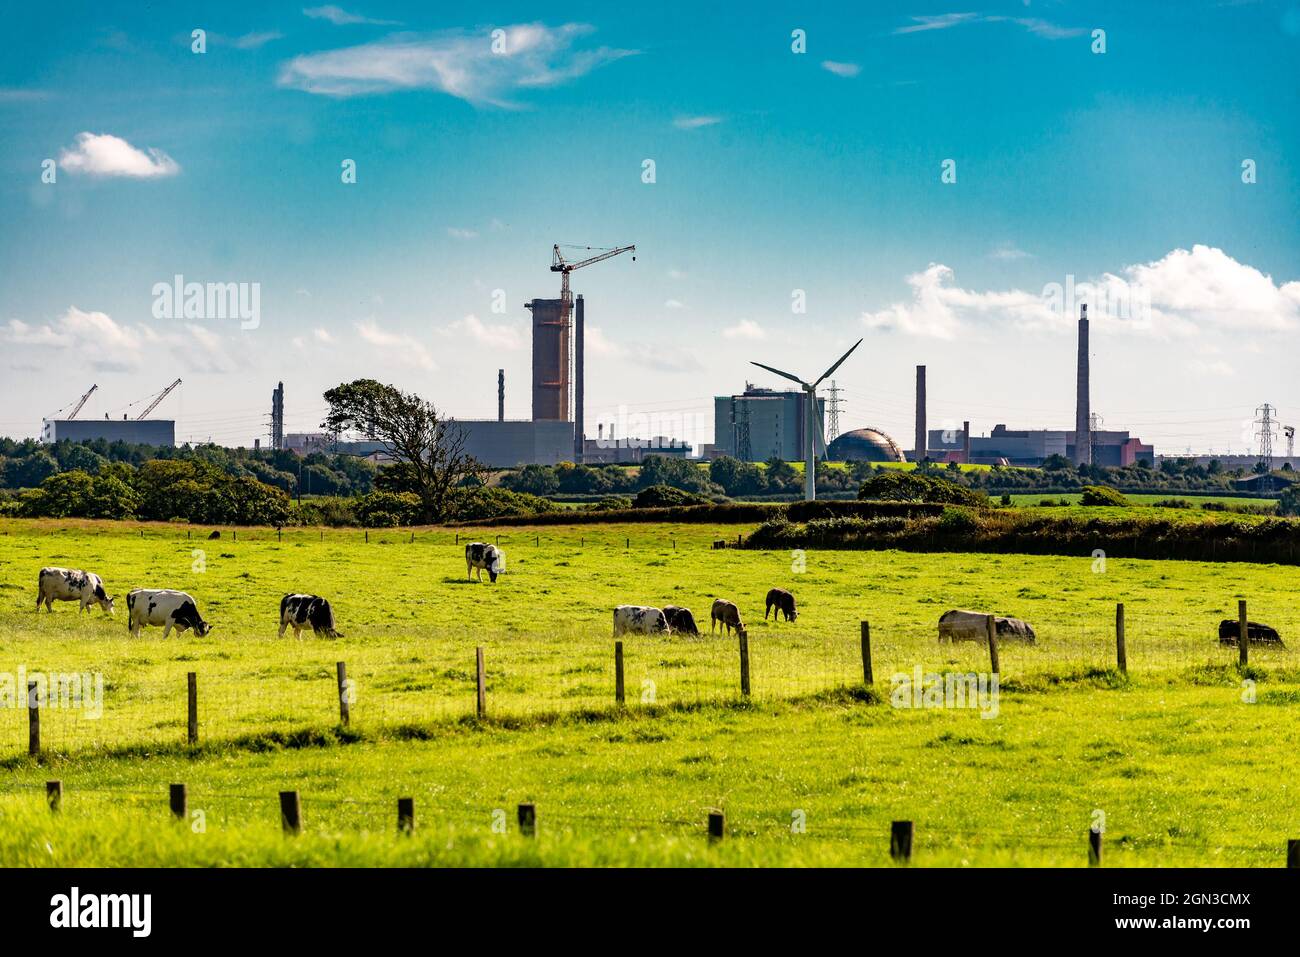 Sellafield nuclear fuel reprocessing and nuclear decommissioning site, close to the village of Seascale on the coast of the Irish Sea in Cumbria, UK Stock Photo